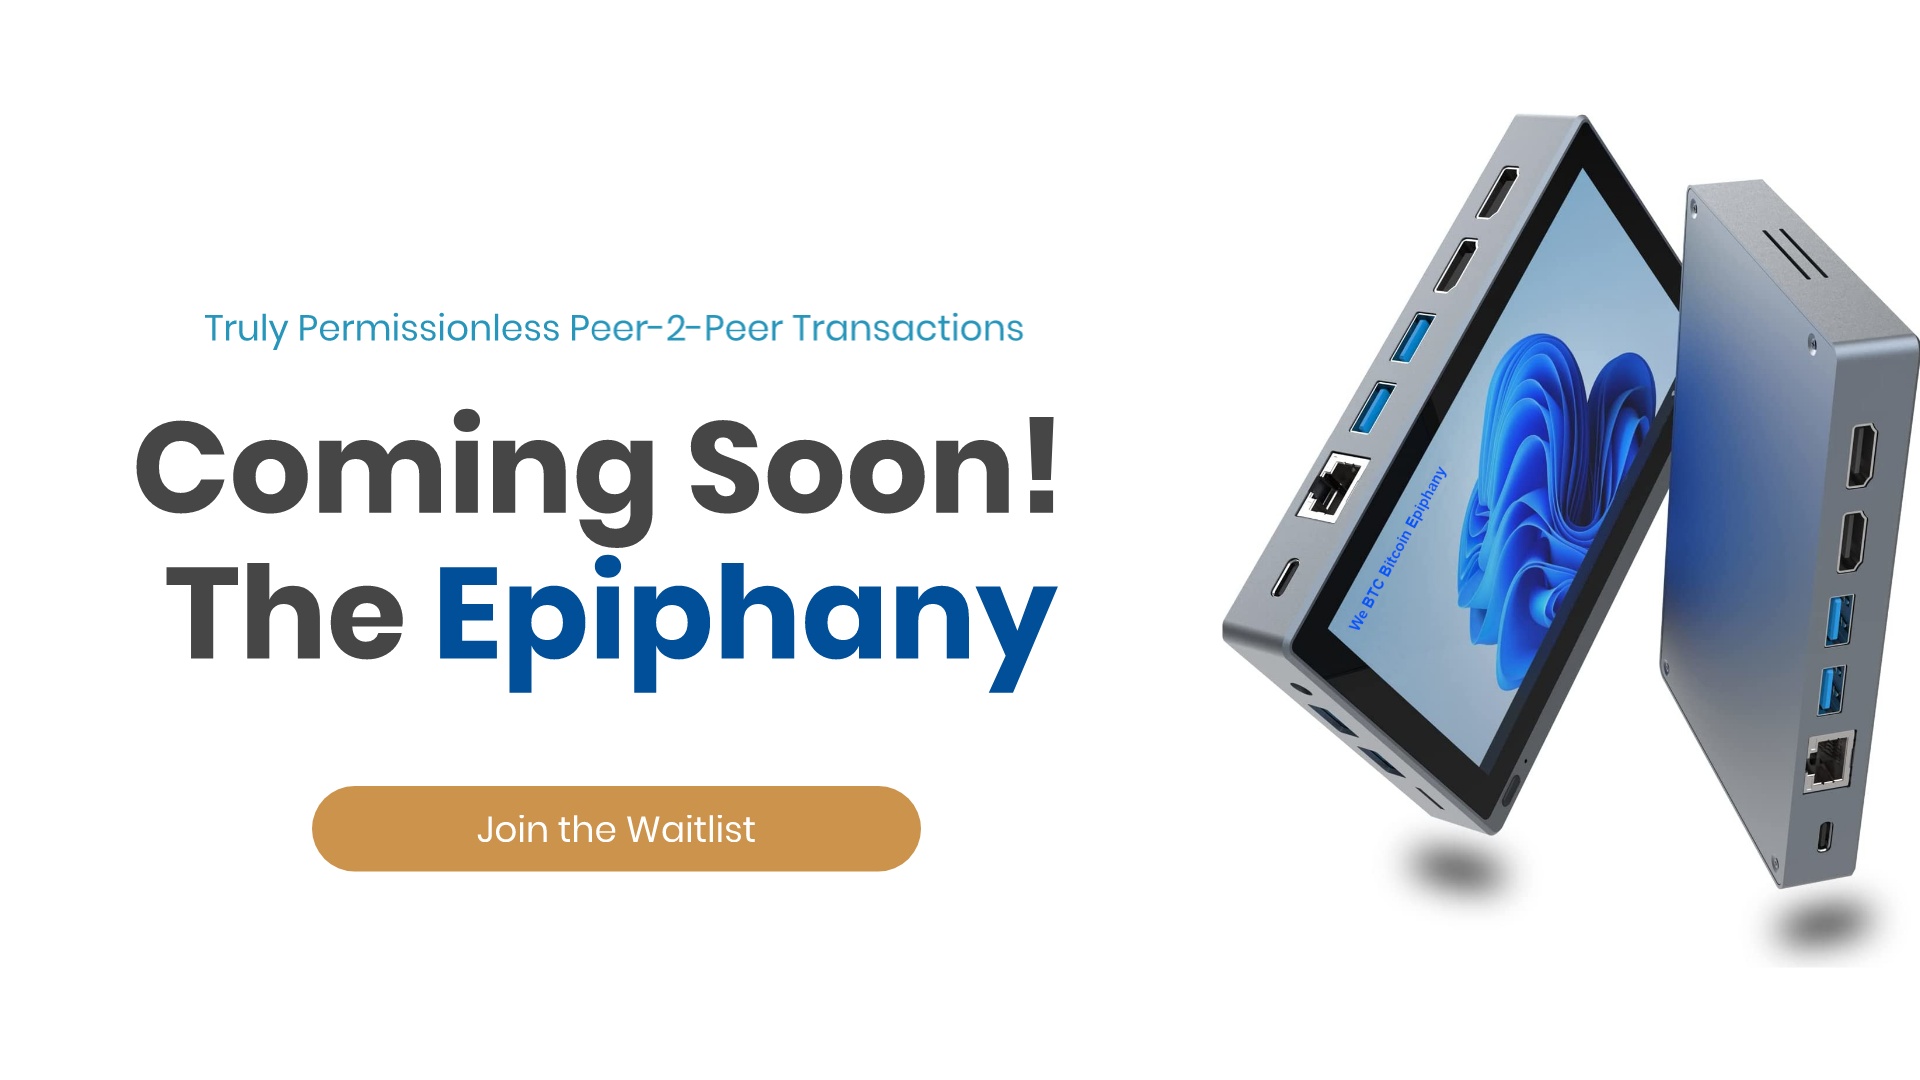 join waitlist for the Epiphany hardcore wallet and private node